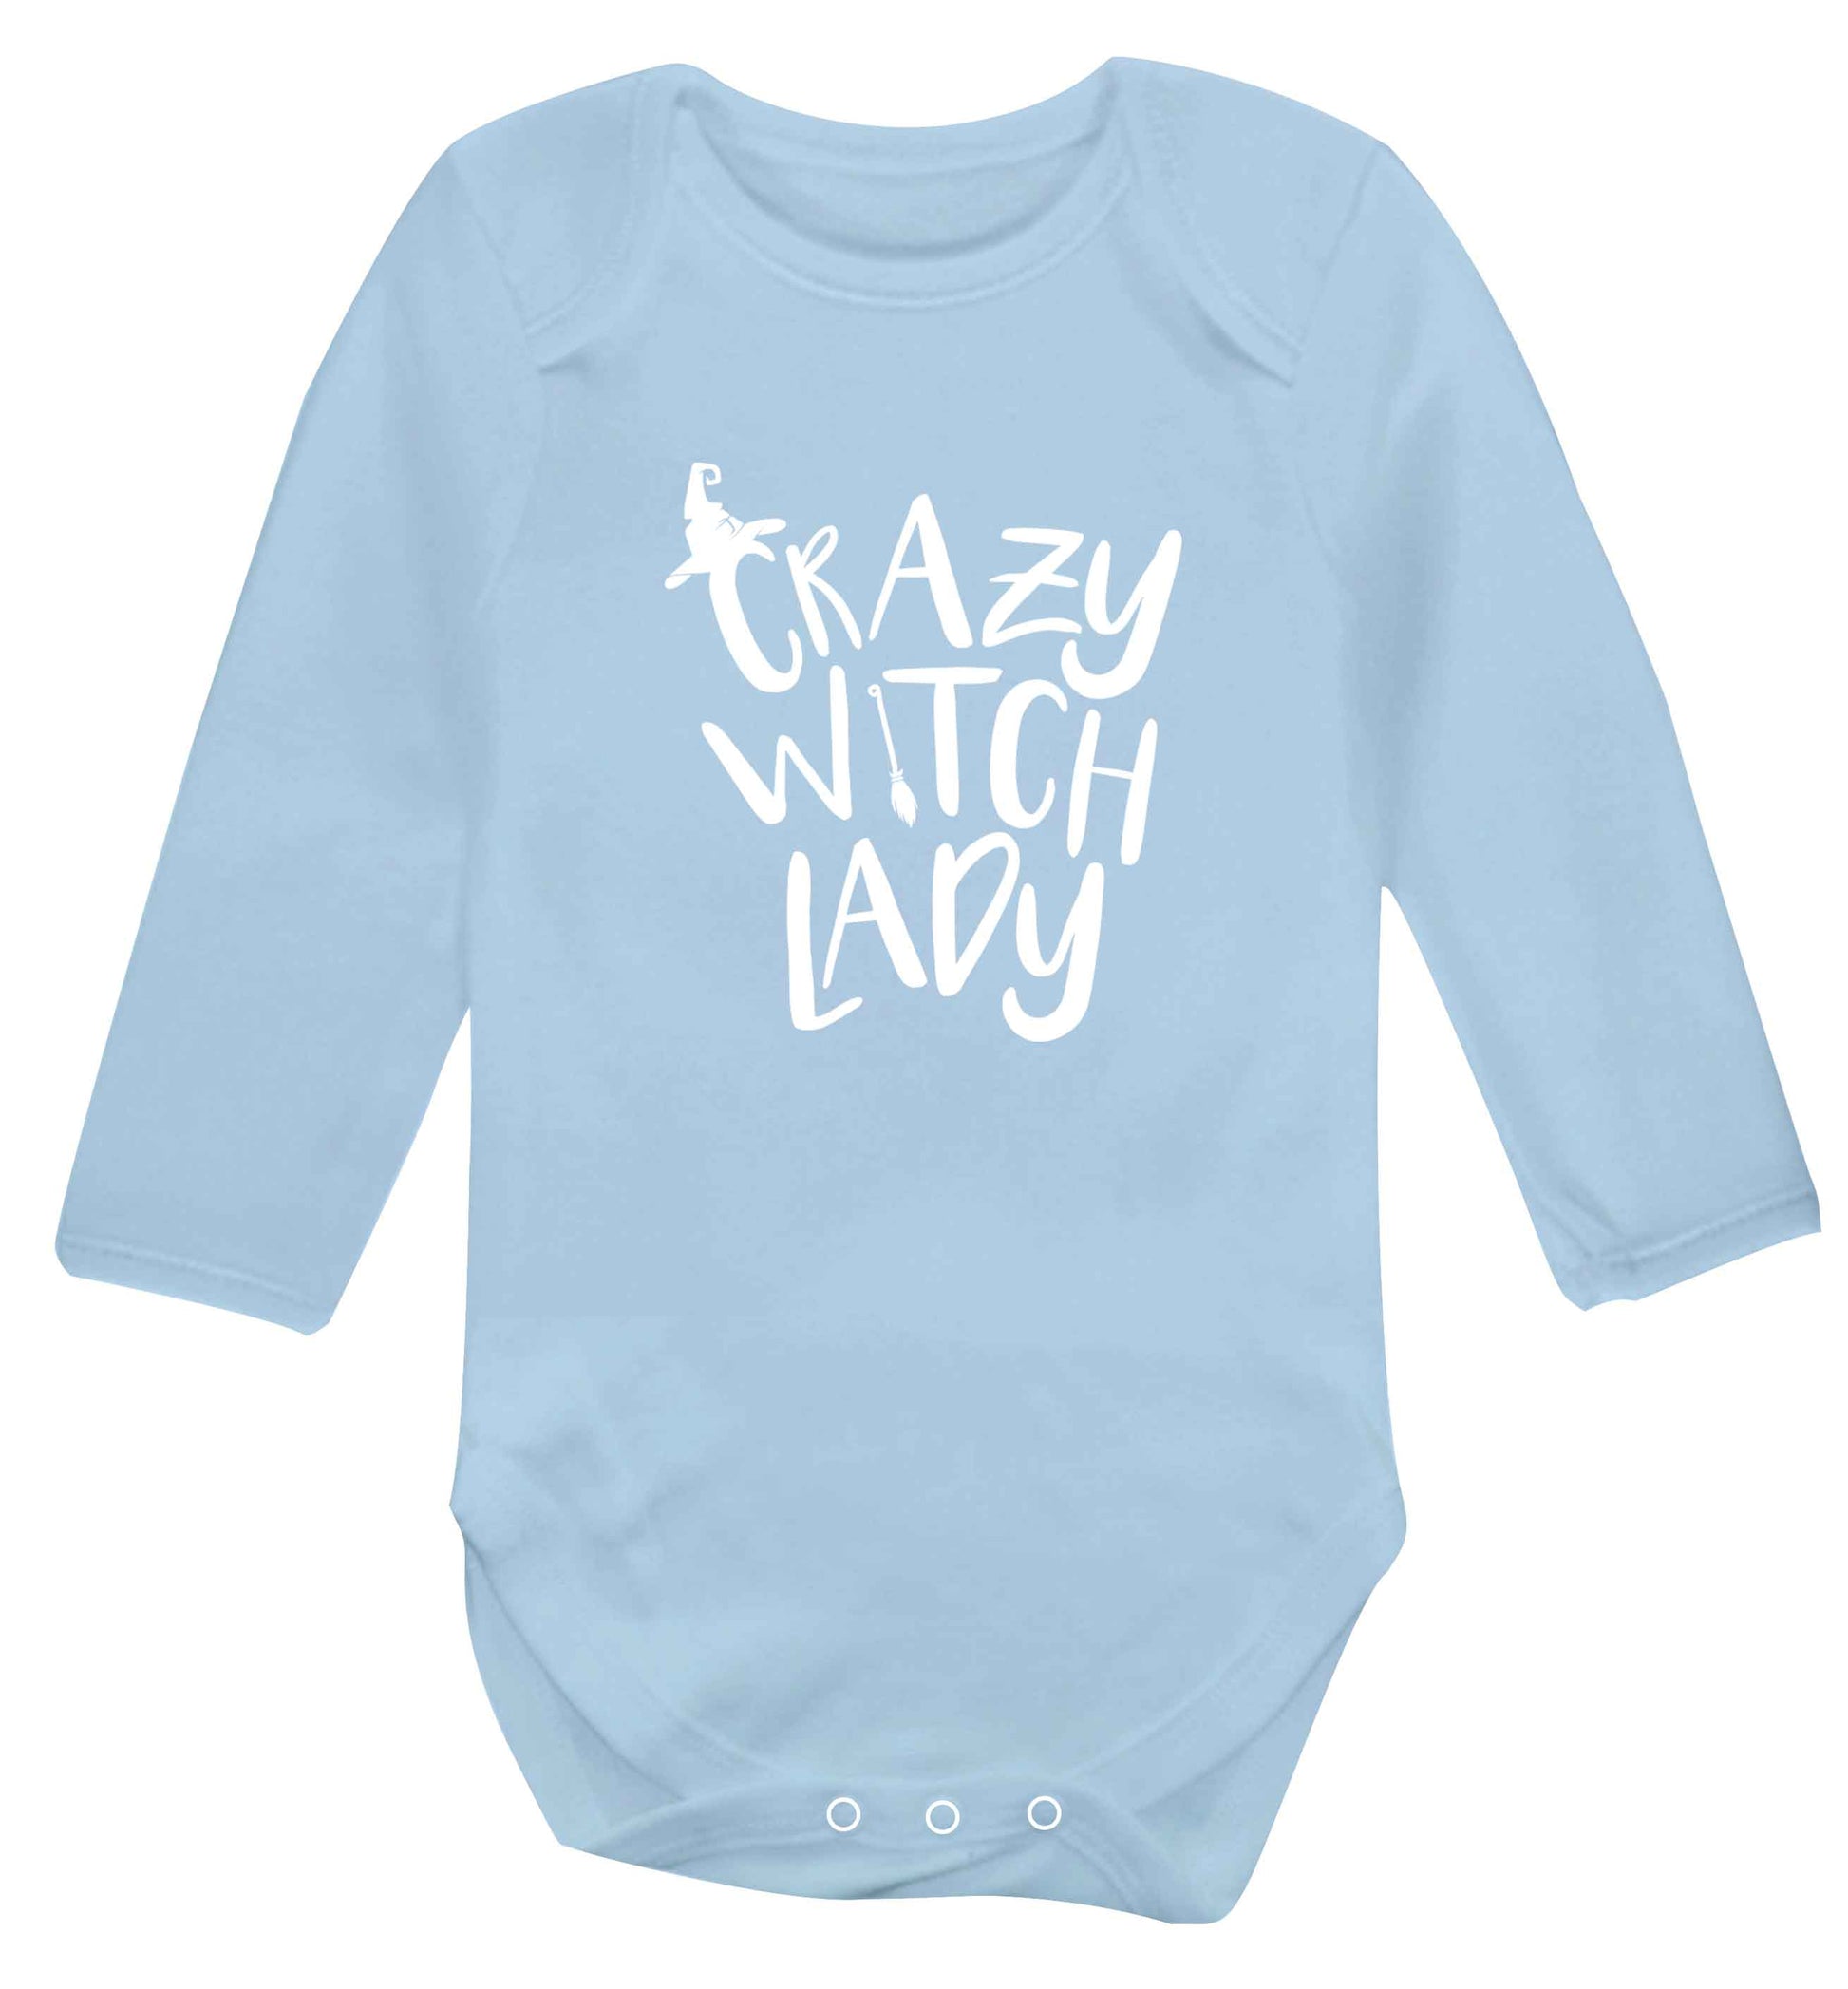 Crazy witch lady baby vest long sleeved pale blue 6-12 months